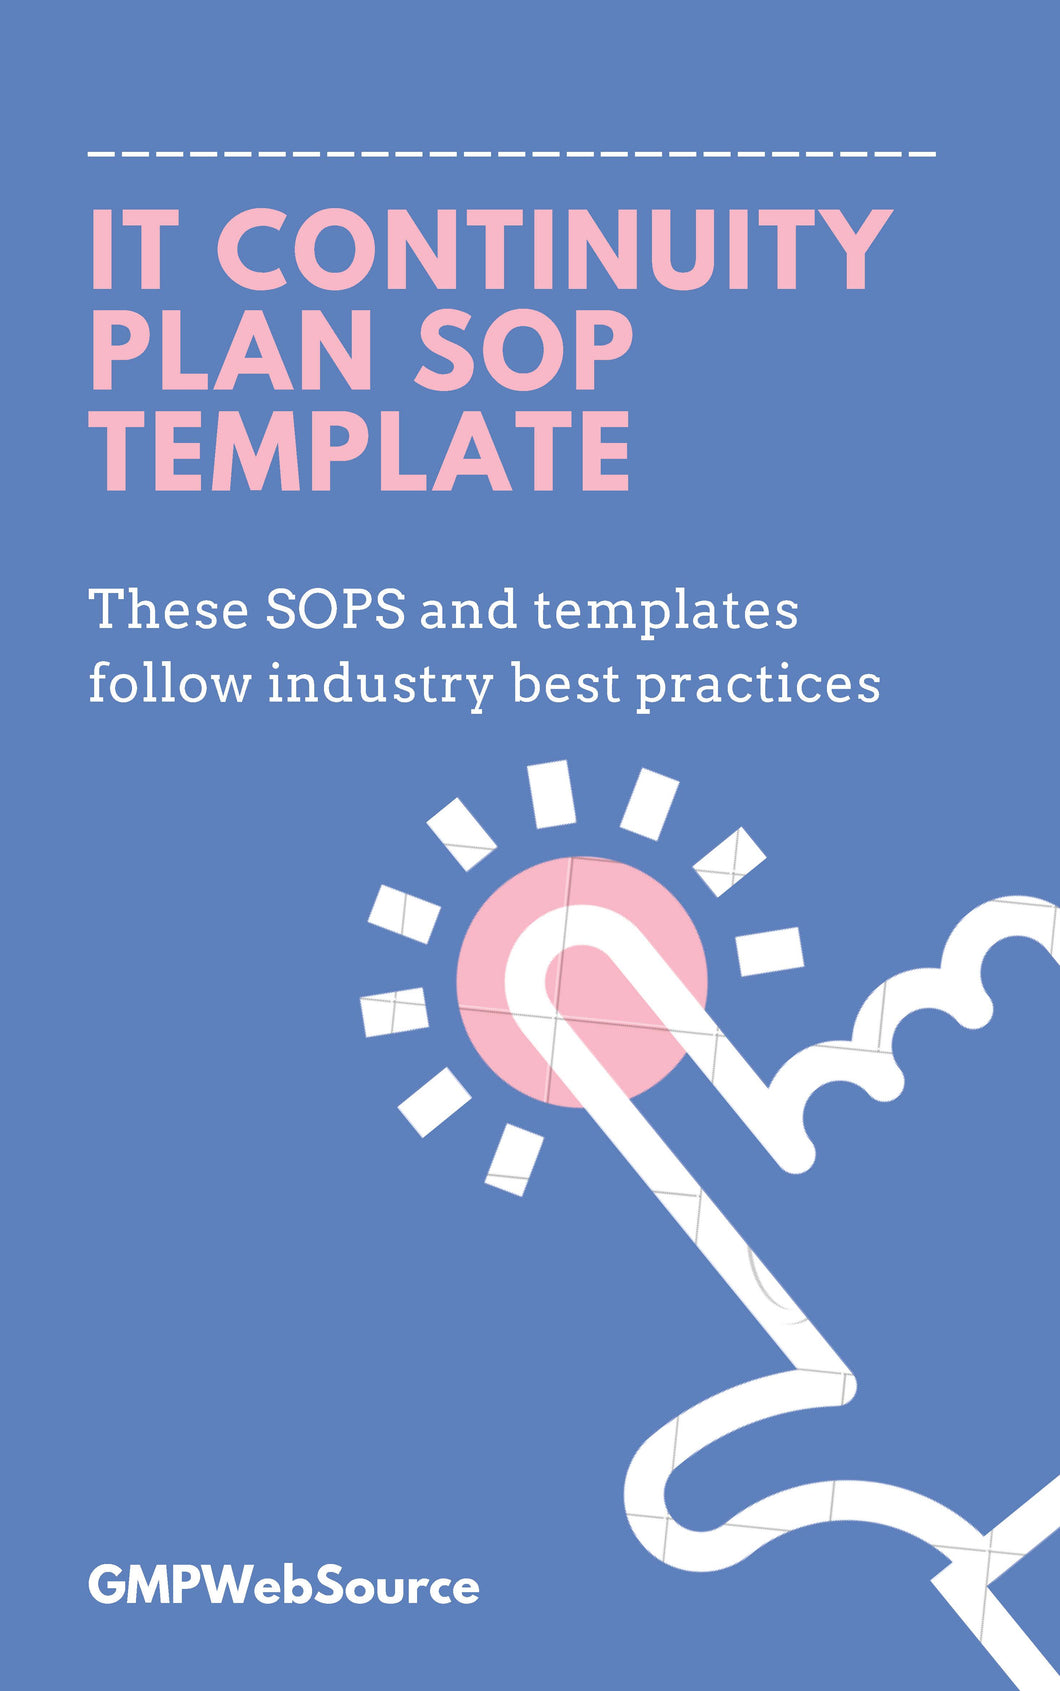 IT Continuity Plan Template